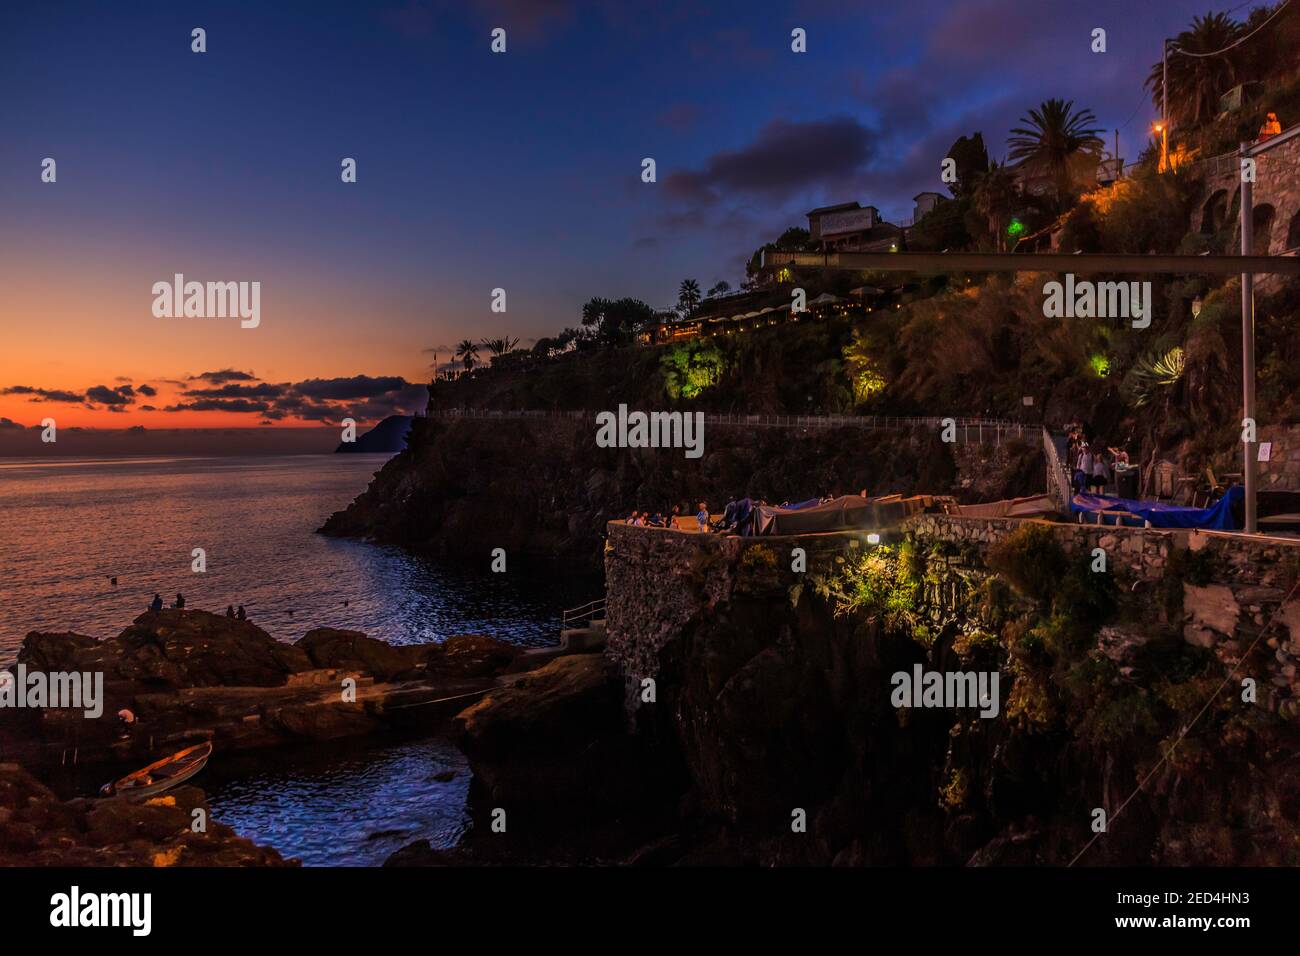 A beautiful sunset afterglow lights the horizon as viewed from the steep, rocky village waterfront in Italy's Cinque Terre. Stock Photo